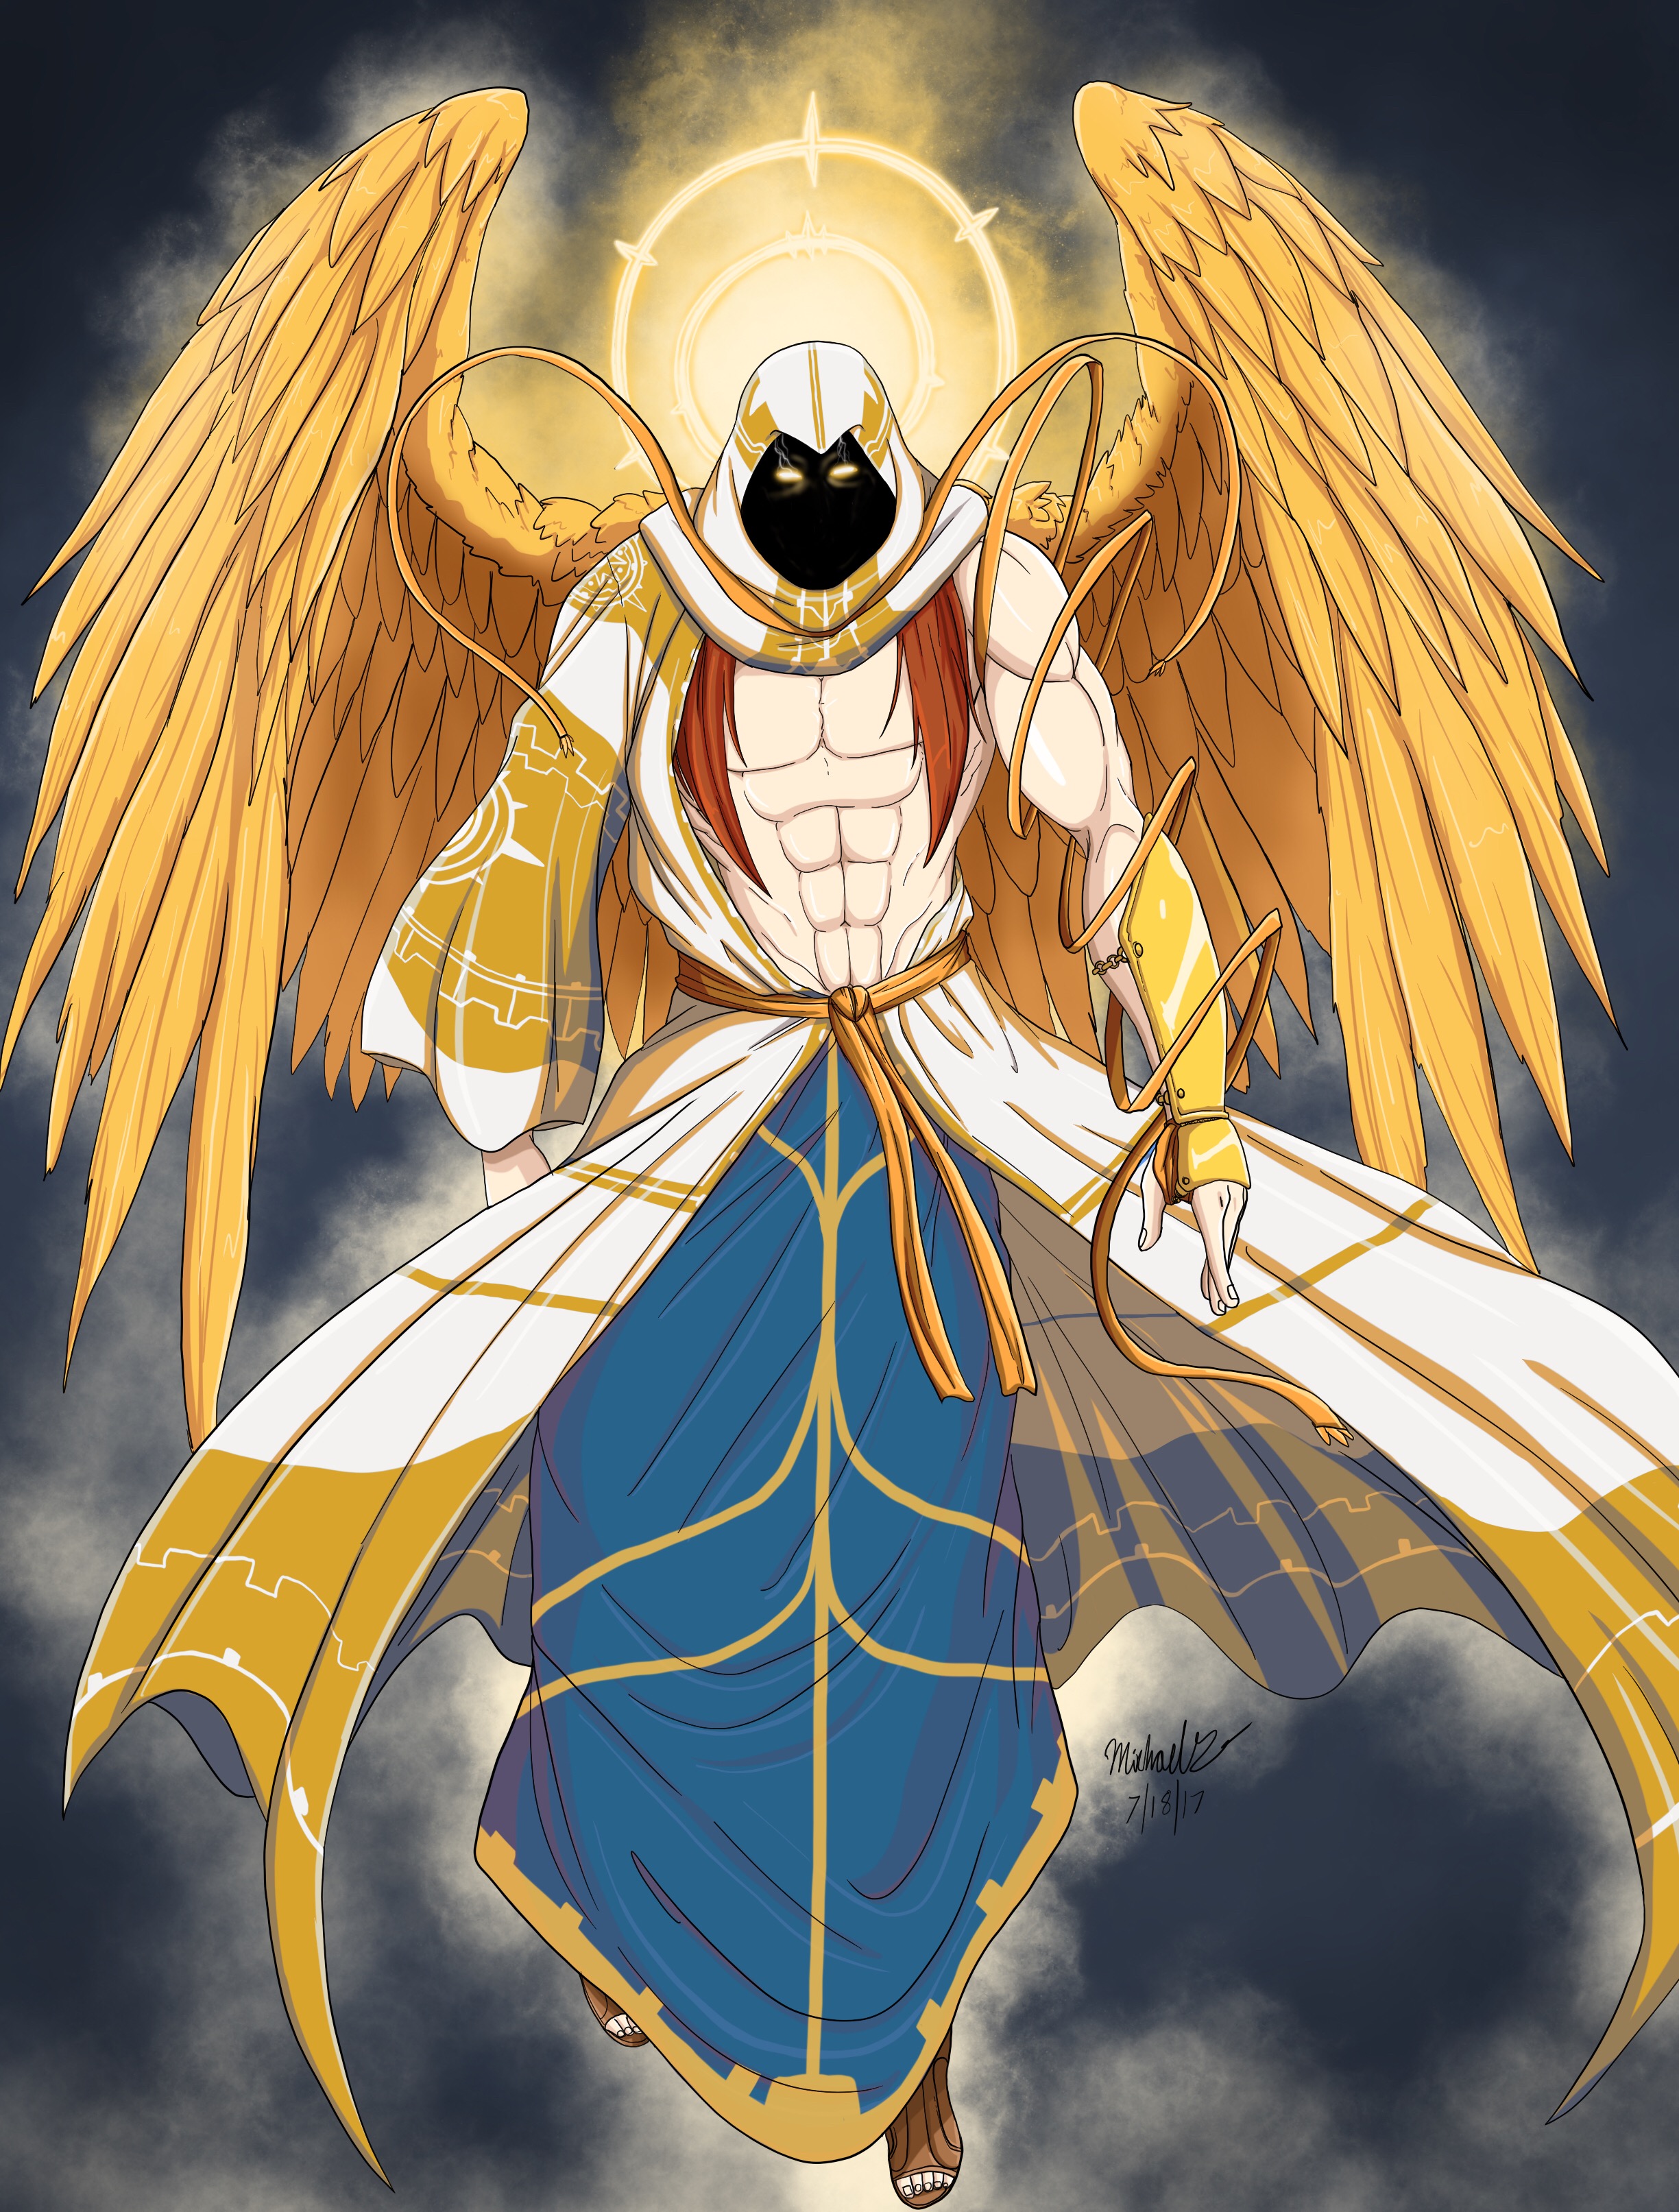 Angemon is an Angel-type Digimon with three pairs of white feathered wings.  He wears a white robe that covers his body and a metal helmet that hides  his face. In his right